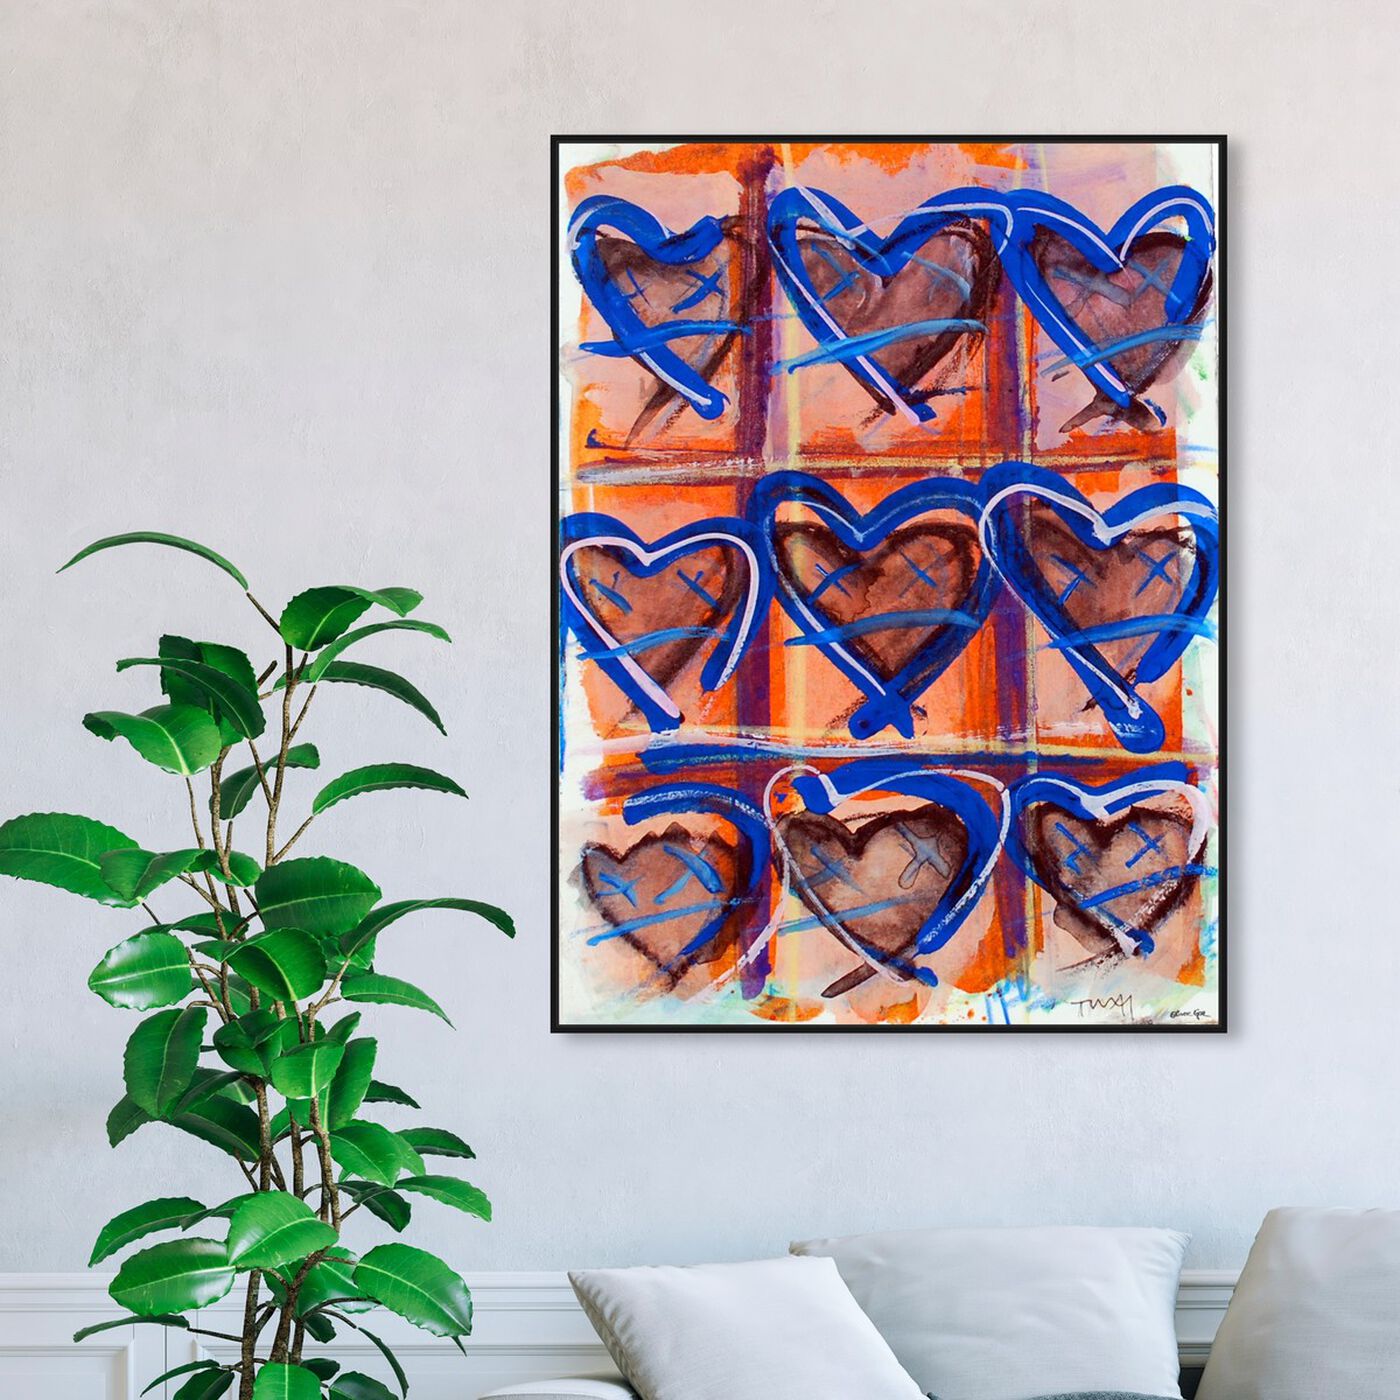 Hanging view of HeartAZUL by Tiago Magro featuring abstract and paint art.